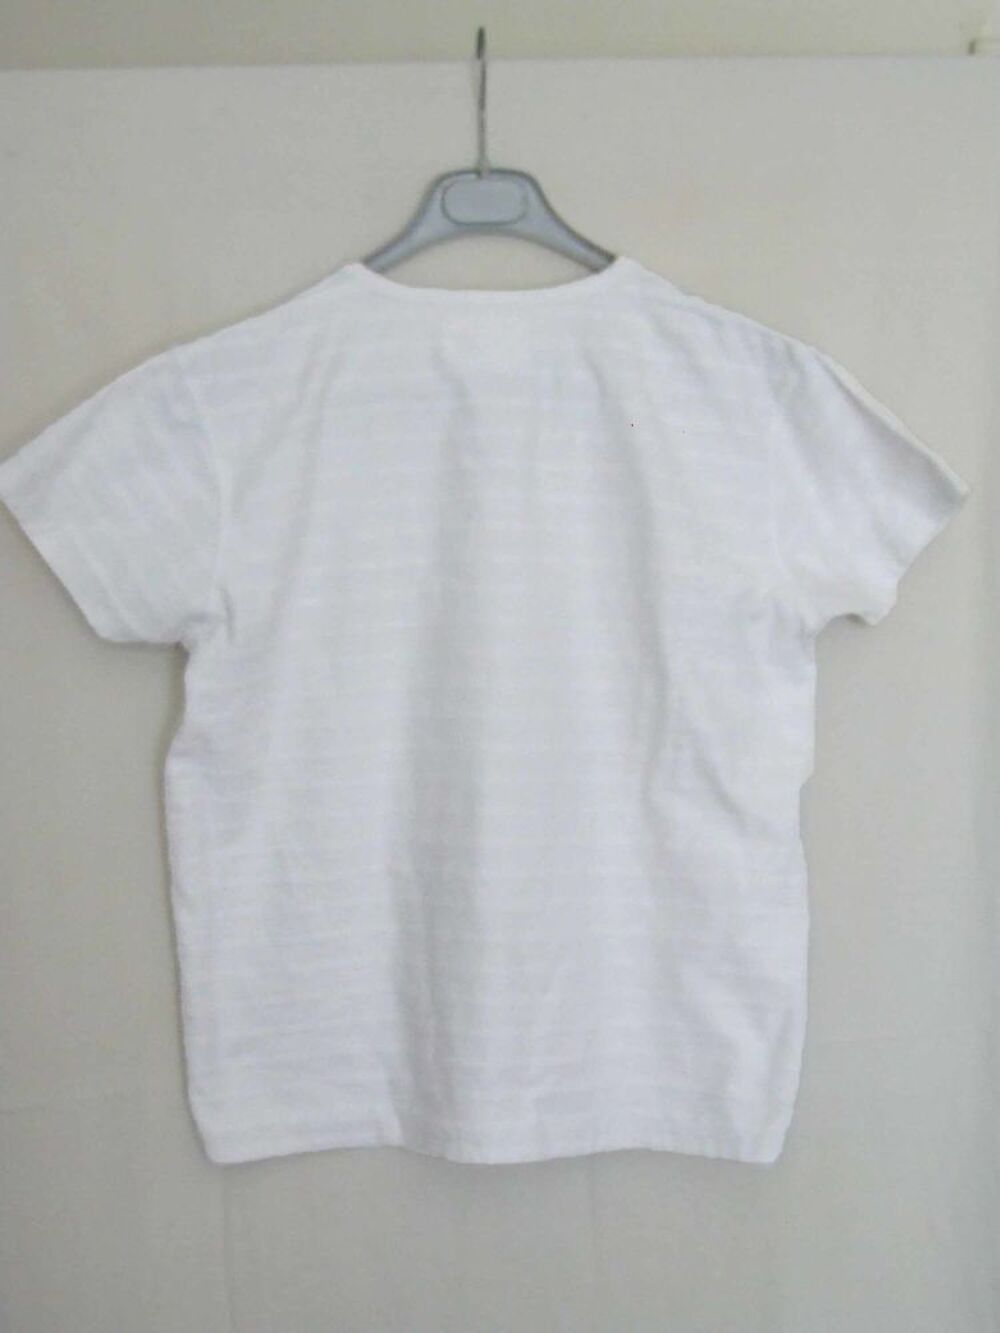 Tee-shirt ARMAND THIERRY Blanc Taille L TBE Vtements